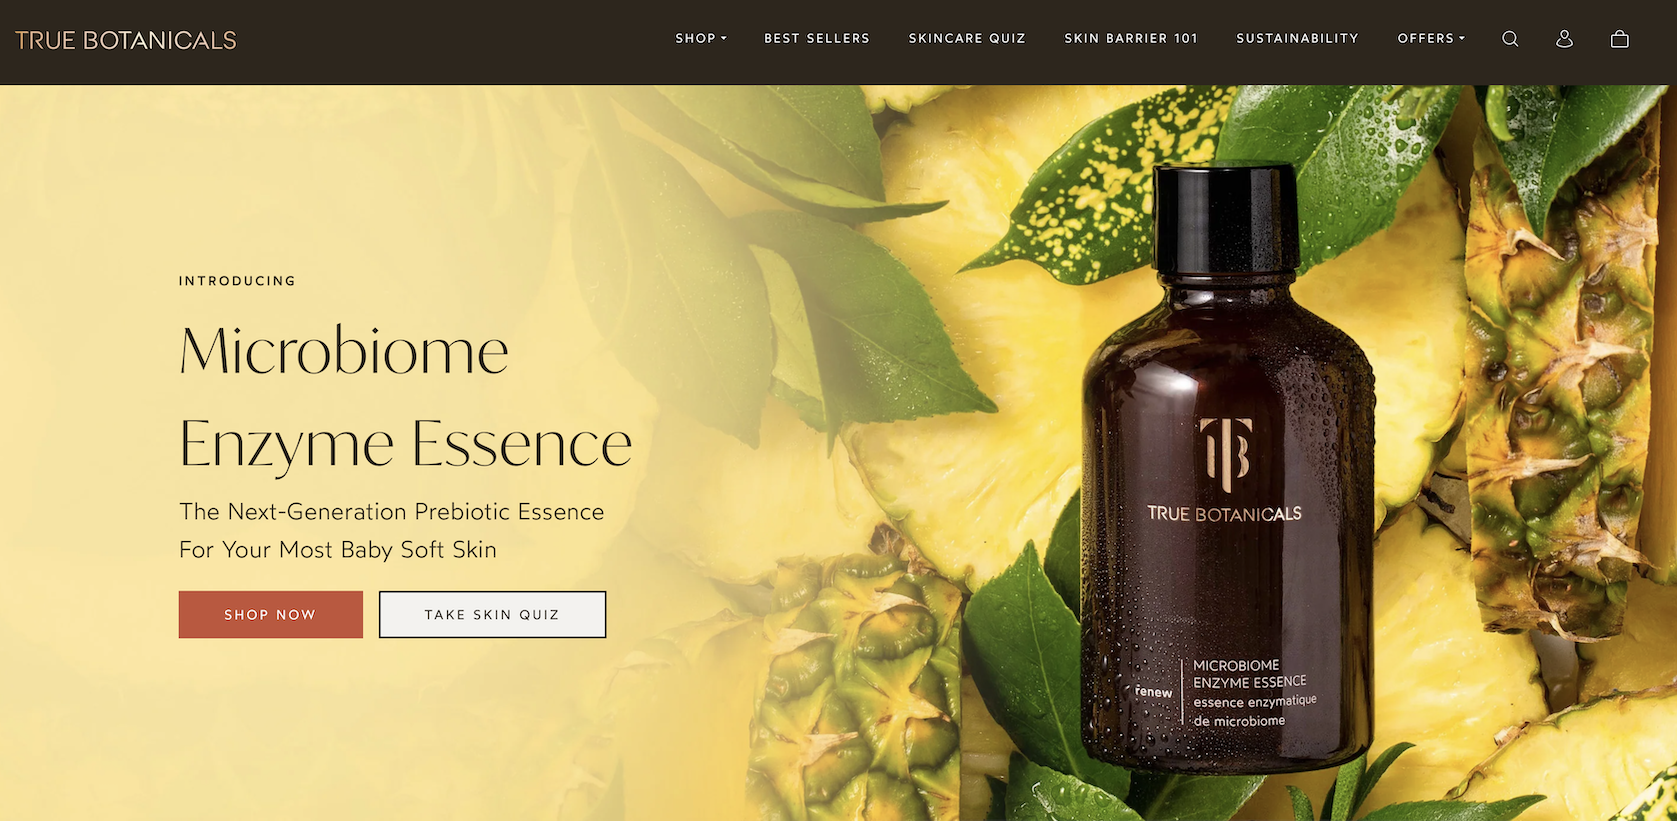 True Botanicals, US-Based Luxury Clean Skincare Brand Backed by Unilever, Announces Successful Completion of Series B Funding Round